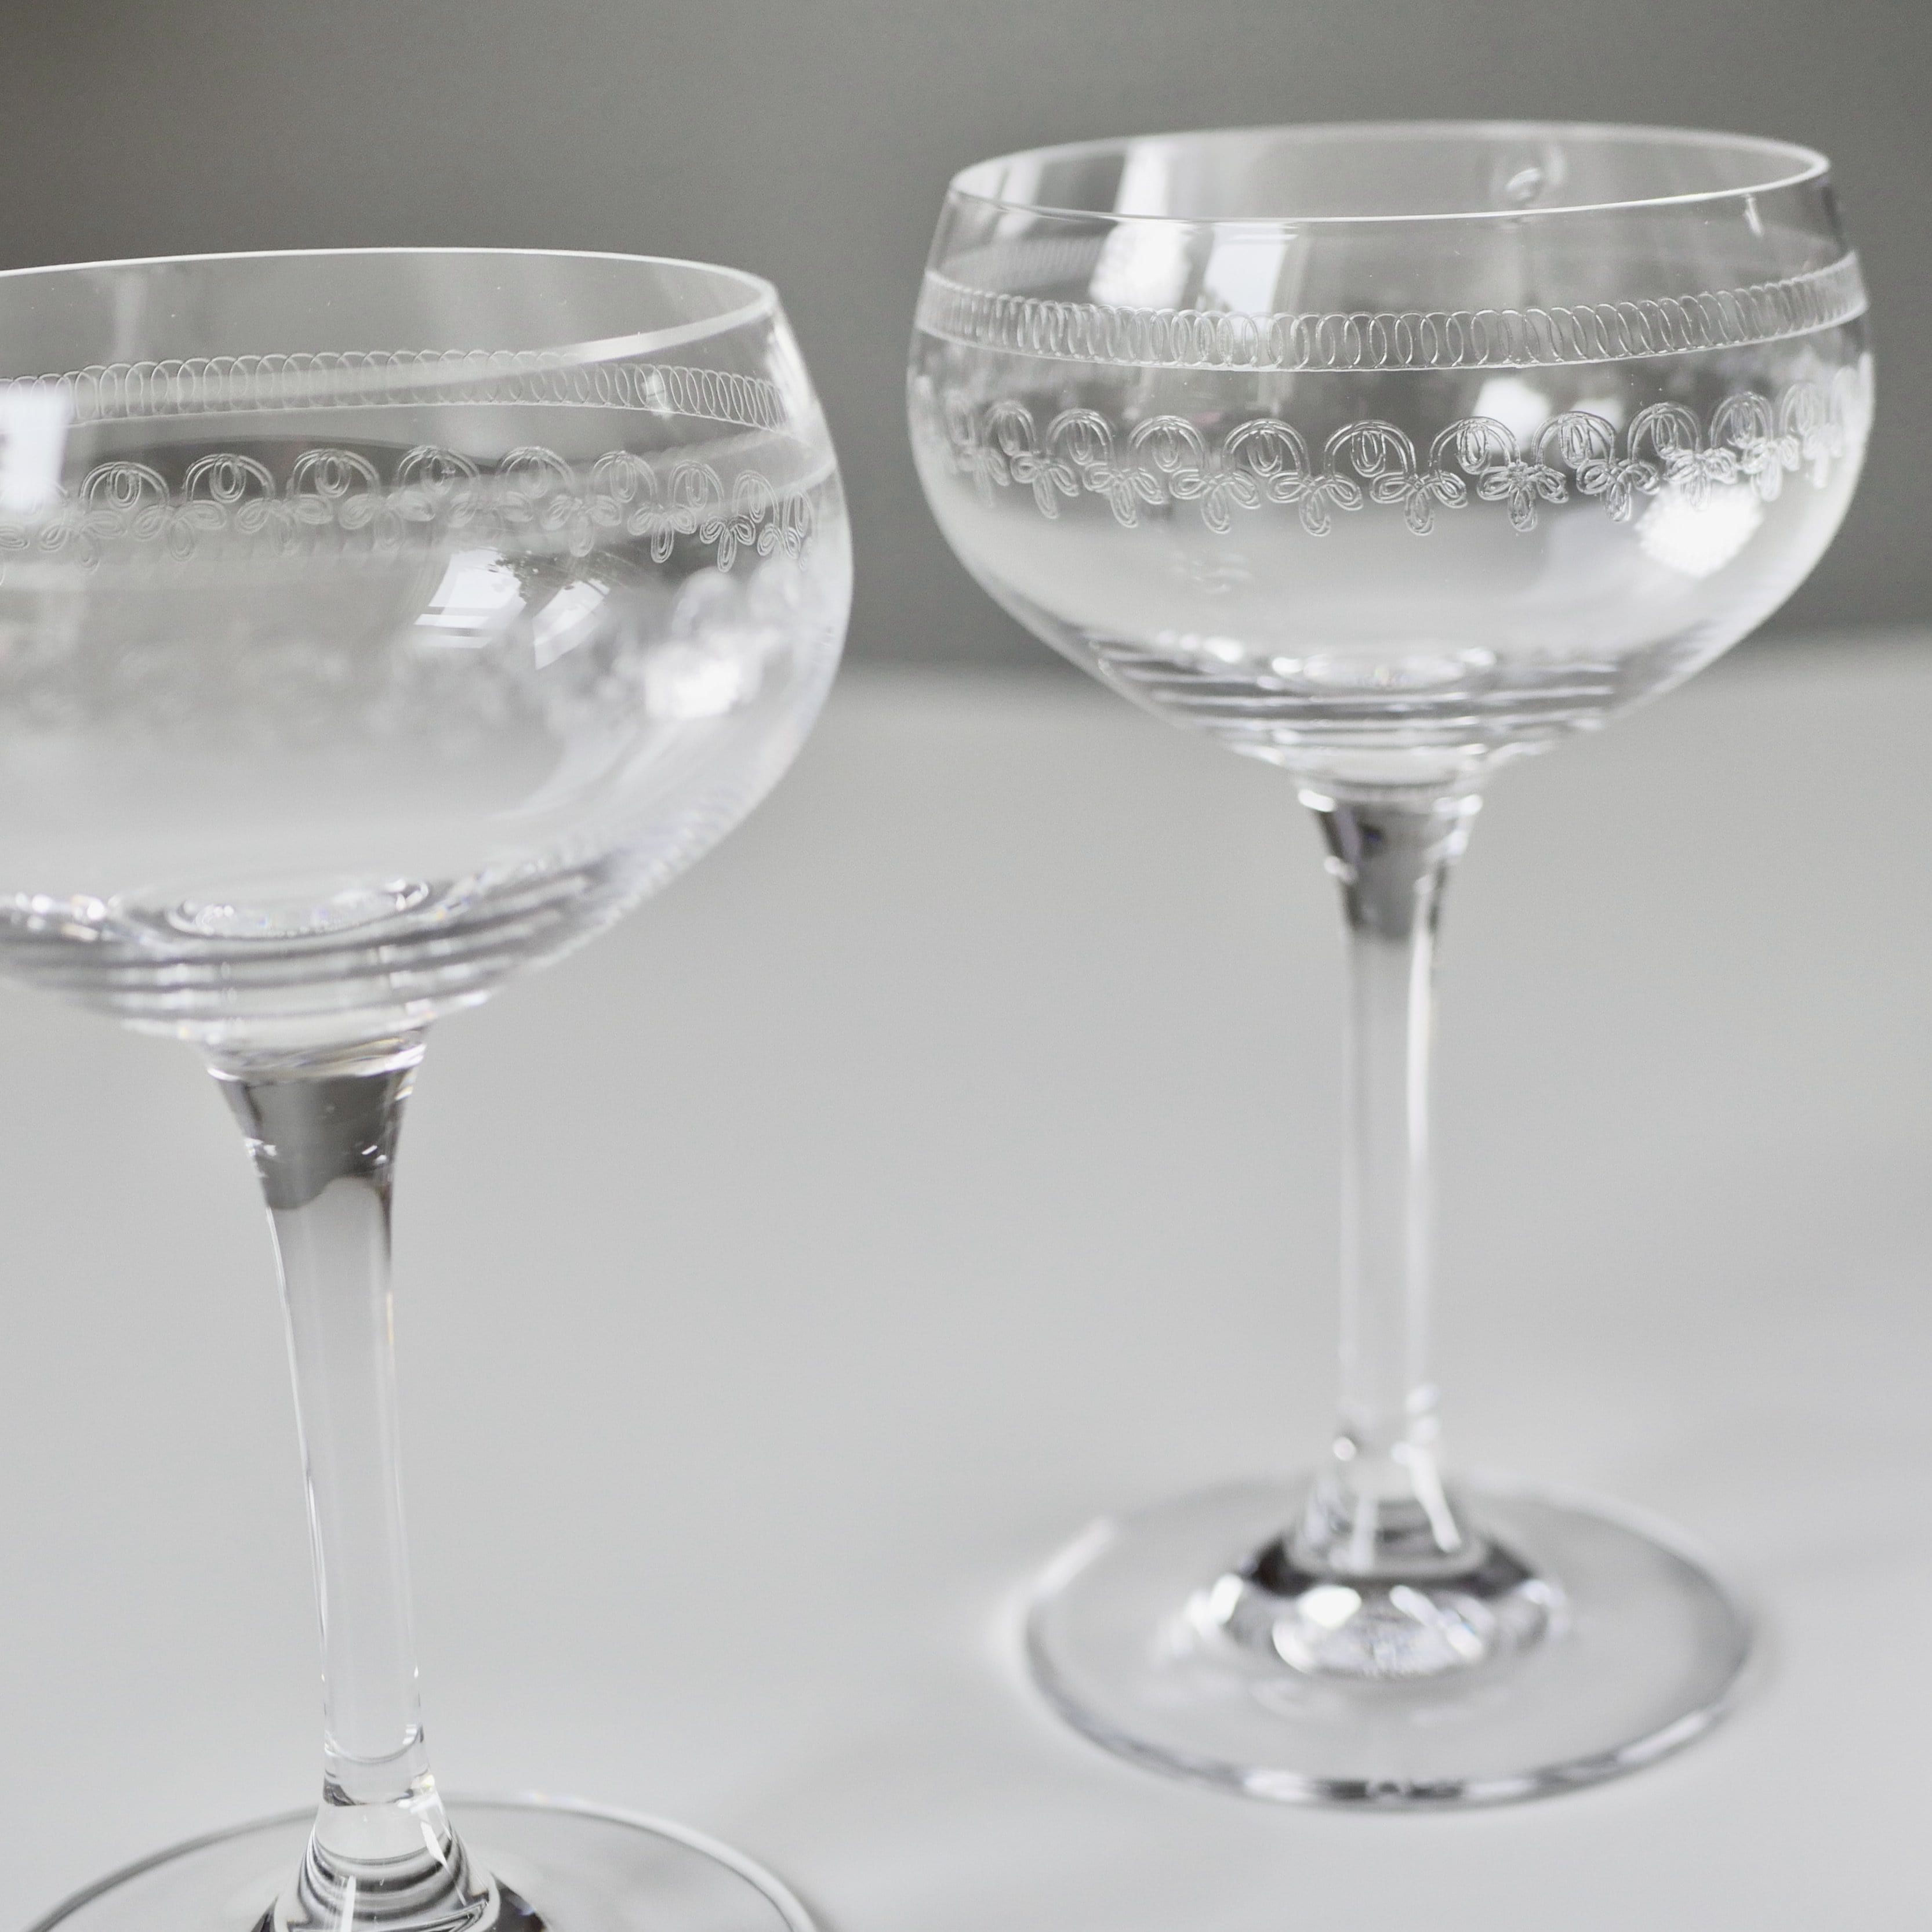 CLARISSA ETCHED CRYSTAL COUPES - Pair